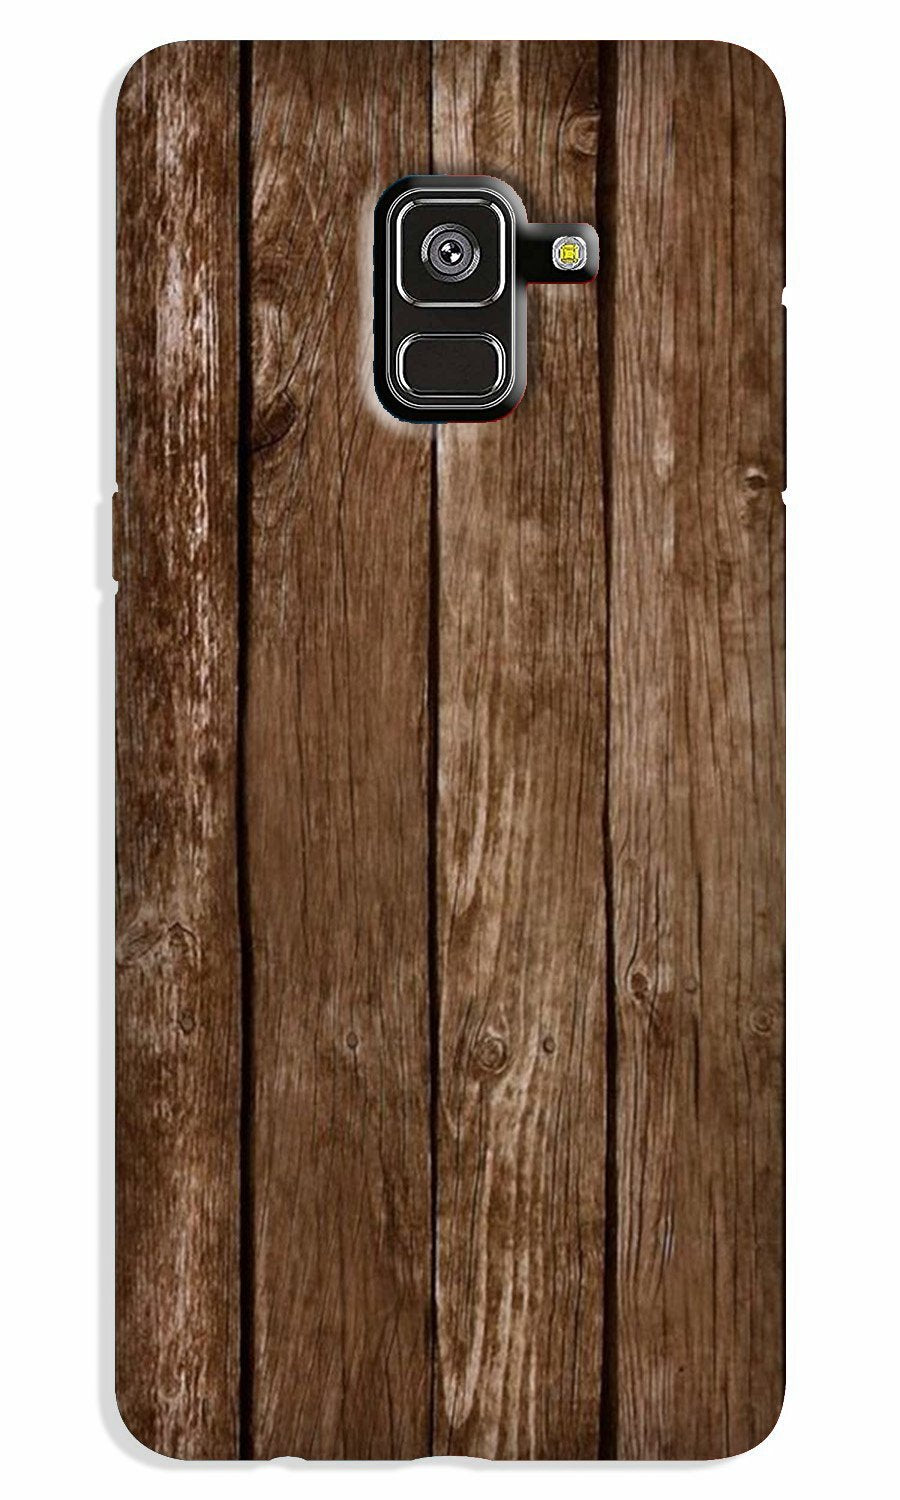 Wooden Look Case for Galaxy A5 (2018)  (Design - 112)